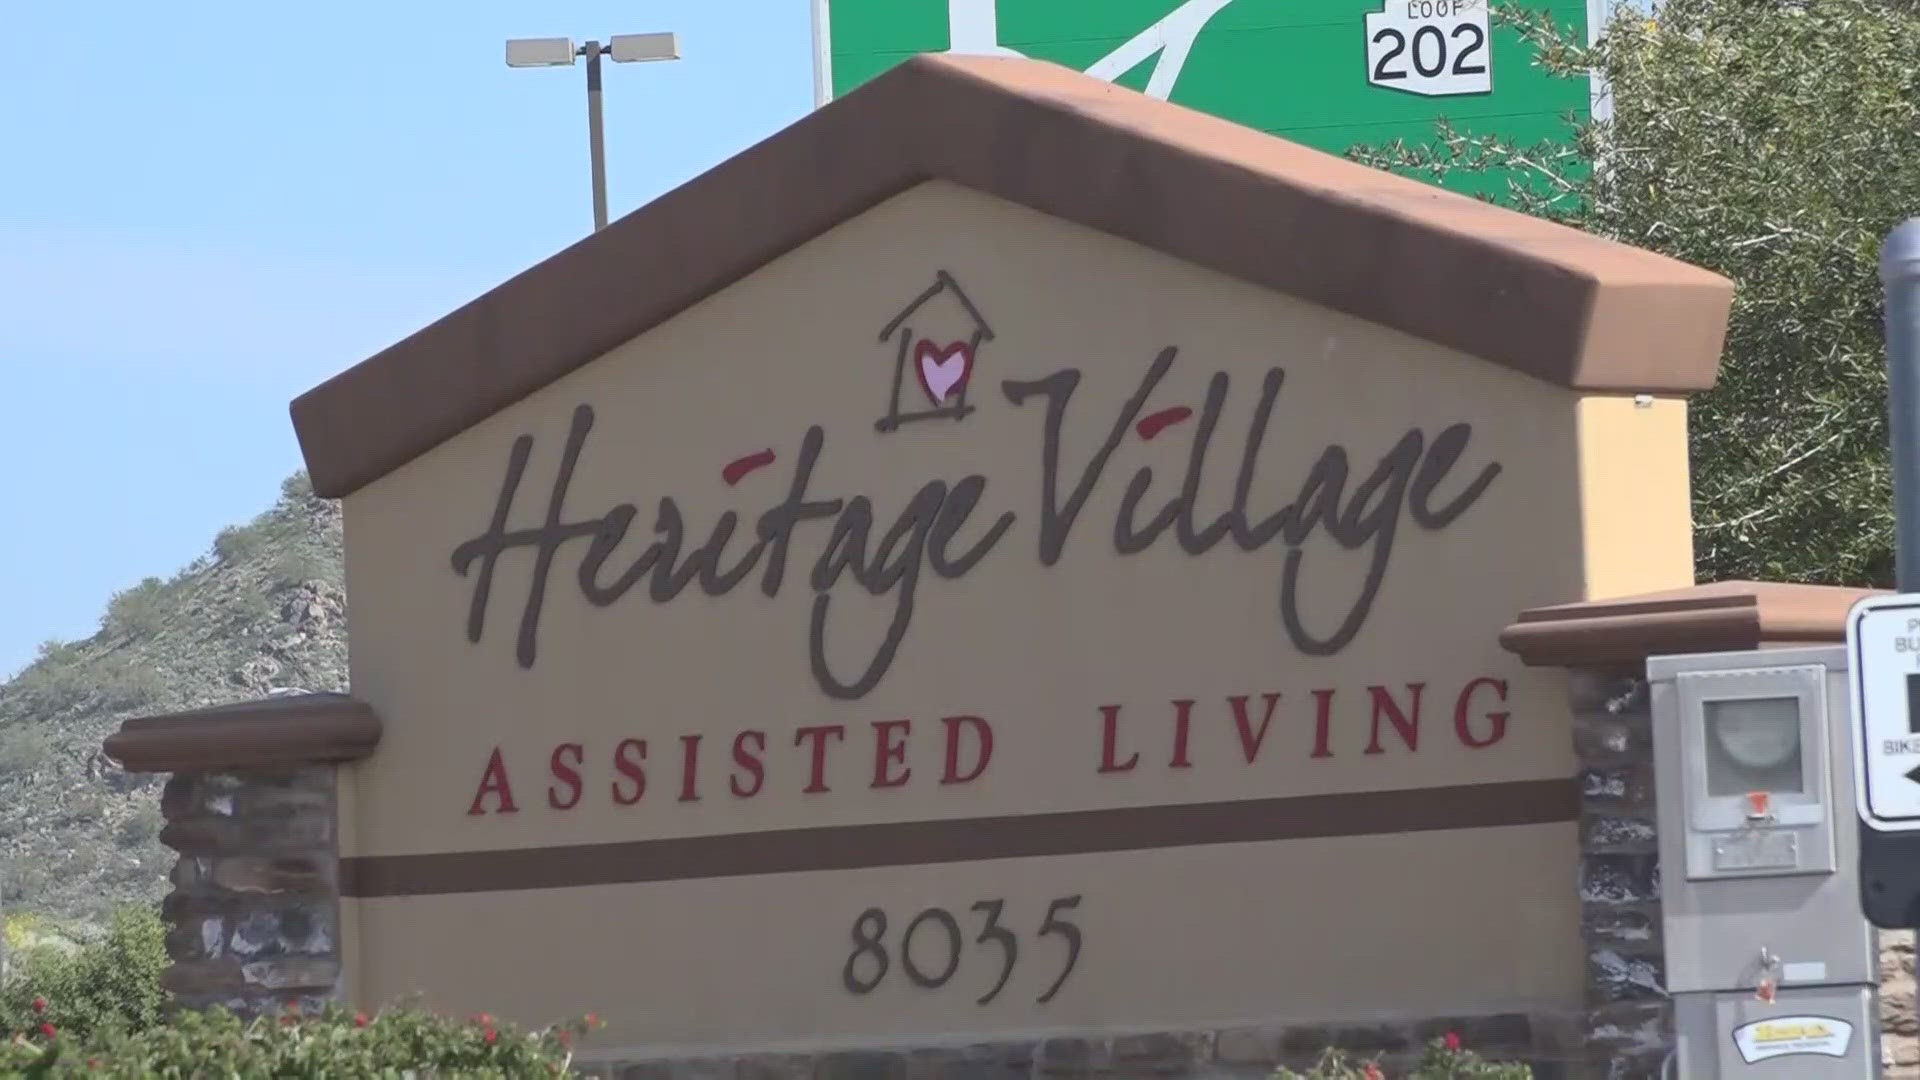 The state is looking to take over Heritage Village Assisted Living as they claim the facility is incapable of complying with the law. Watch the video for more.